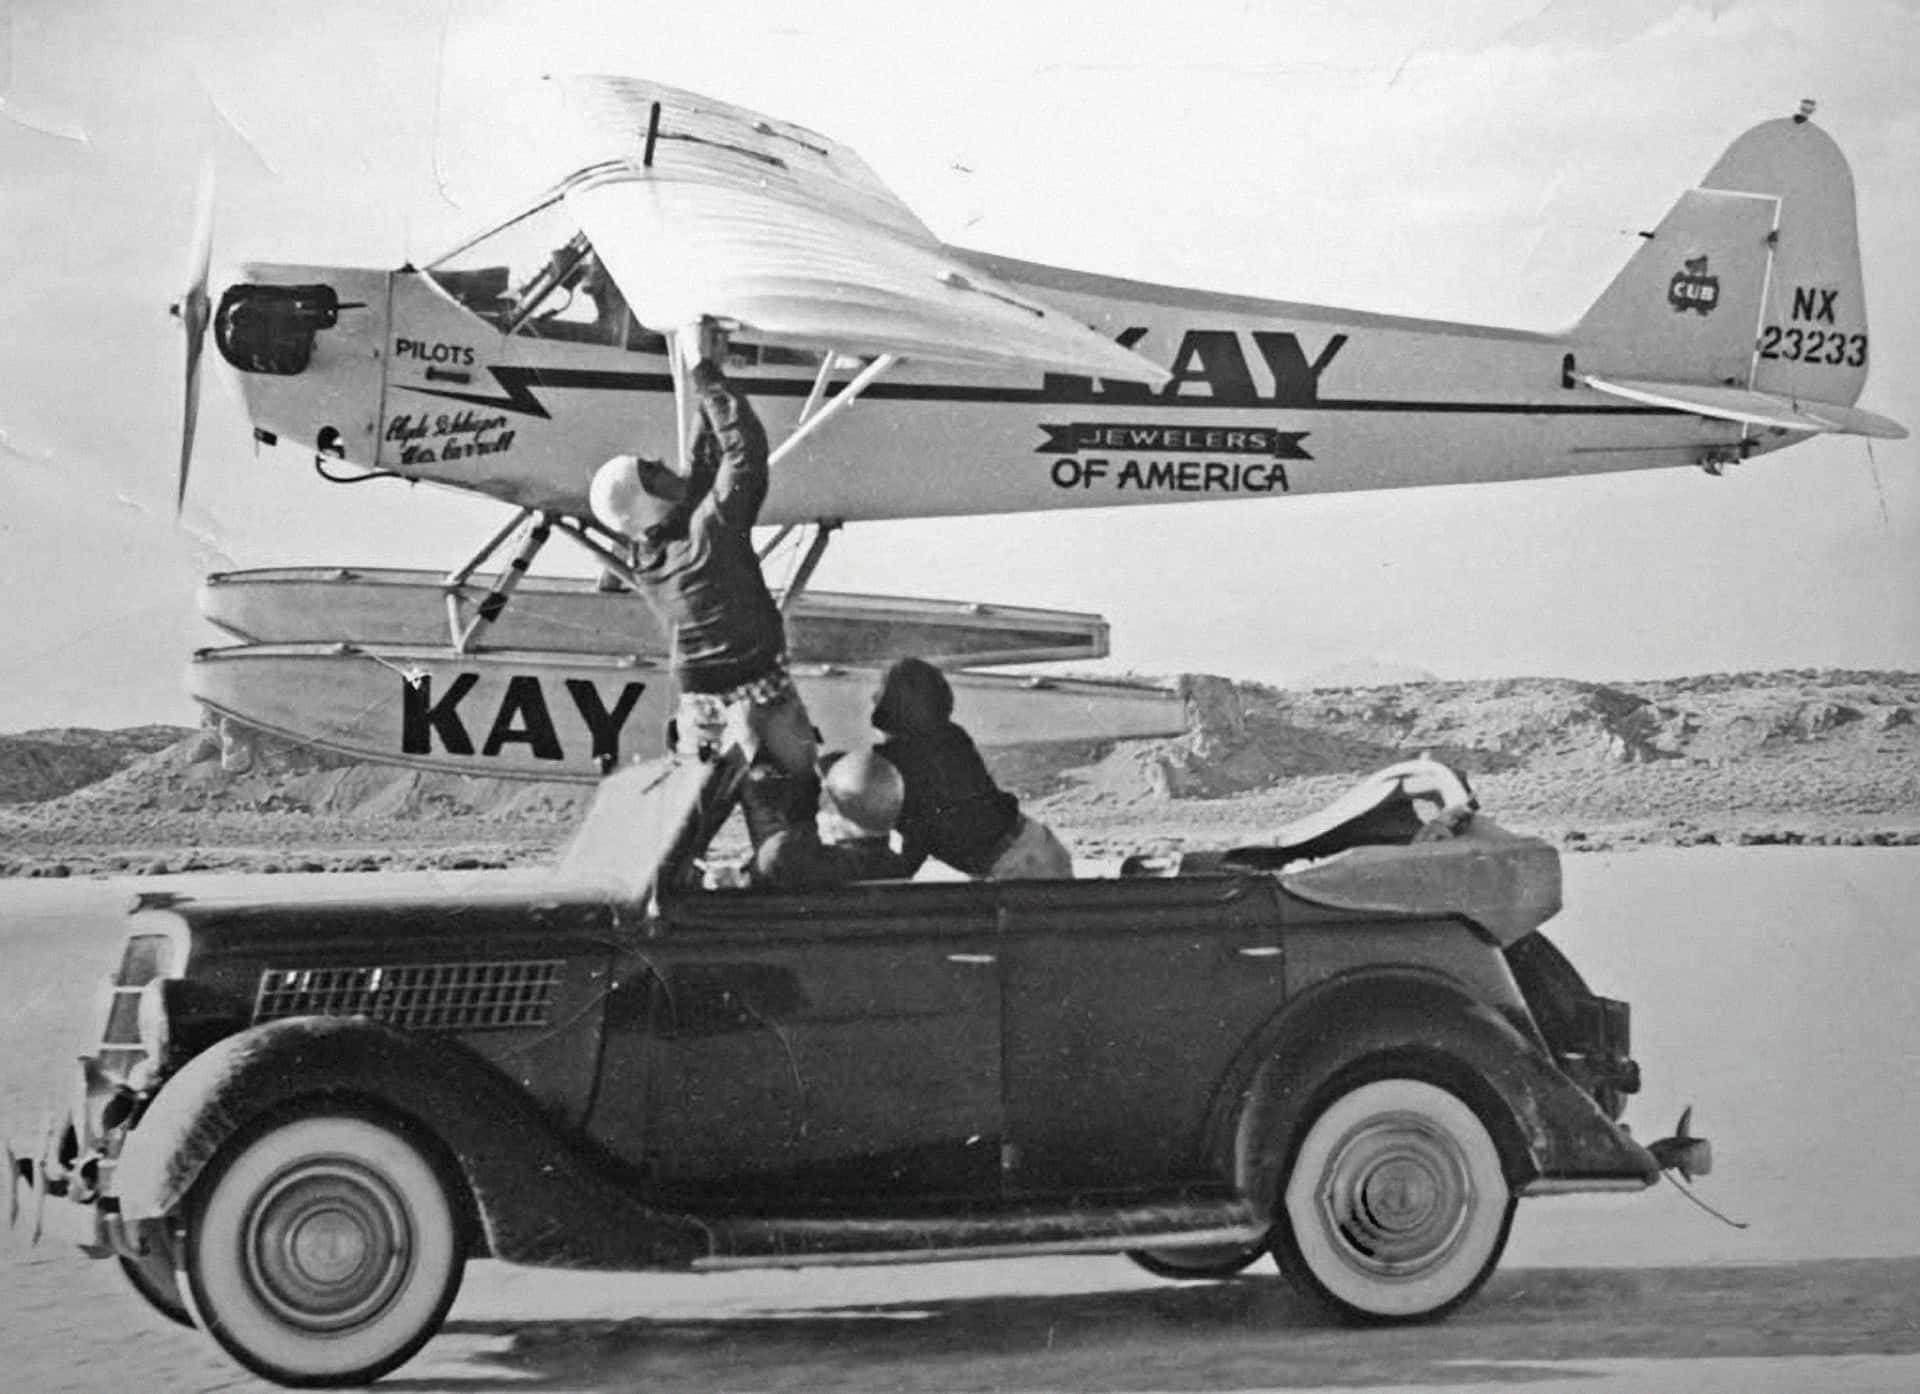 Wes Carroll and Clyde Schlieper were kept aloft thanks to canned fuel and other supplies passed up from a fast-moving 1935 Ford convertible. This picture also appears to demonstrate servicing the wingtip navigation light.